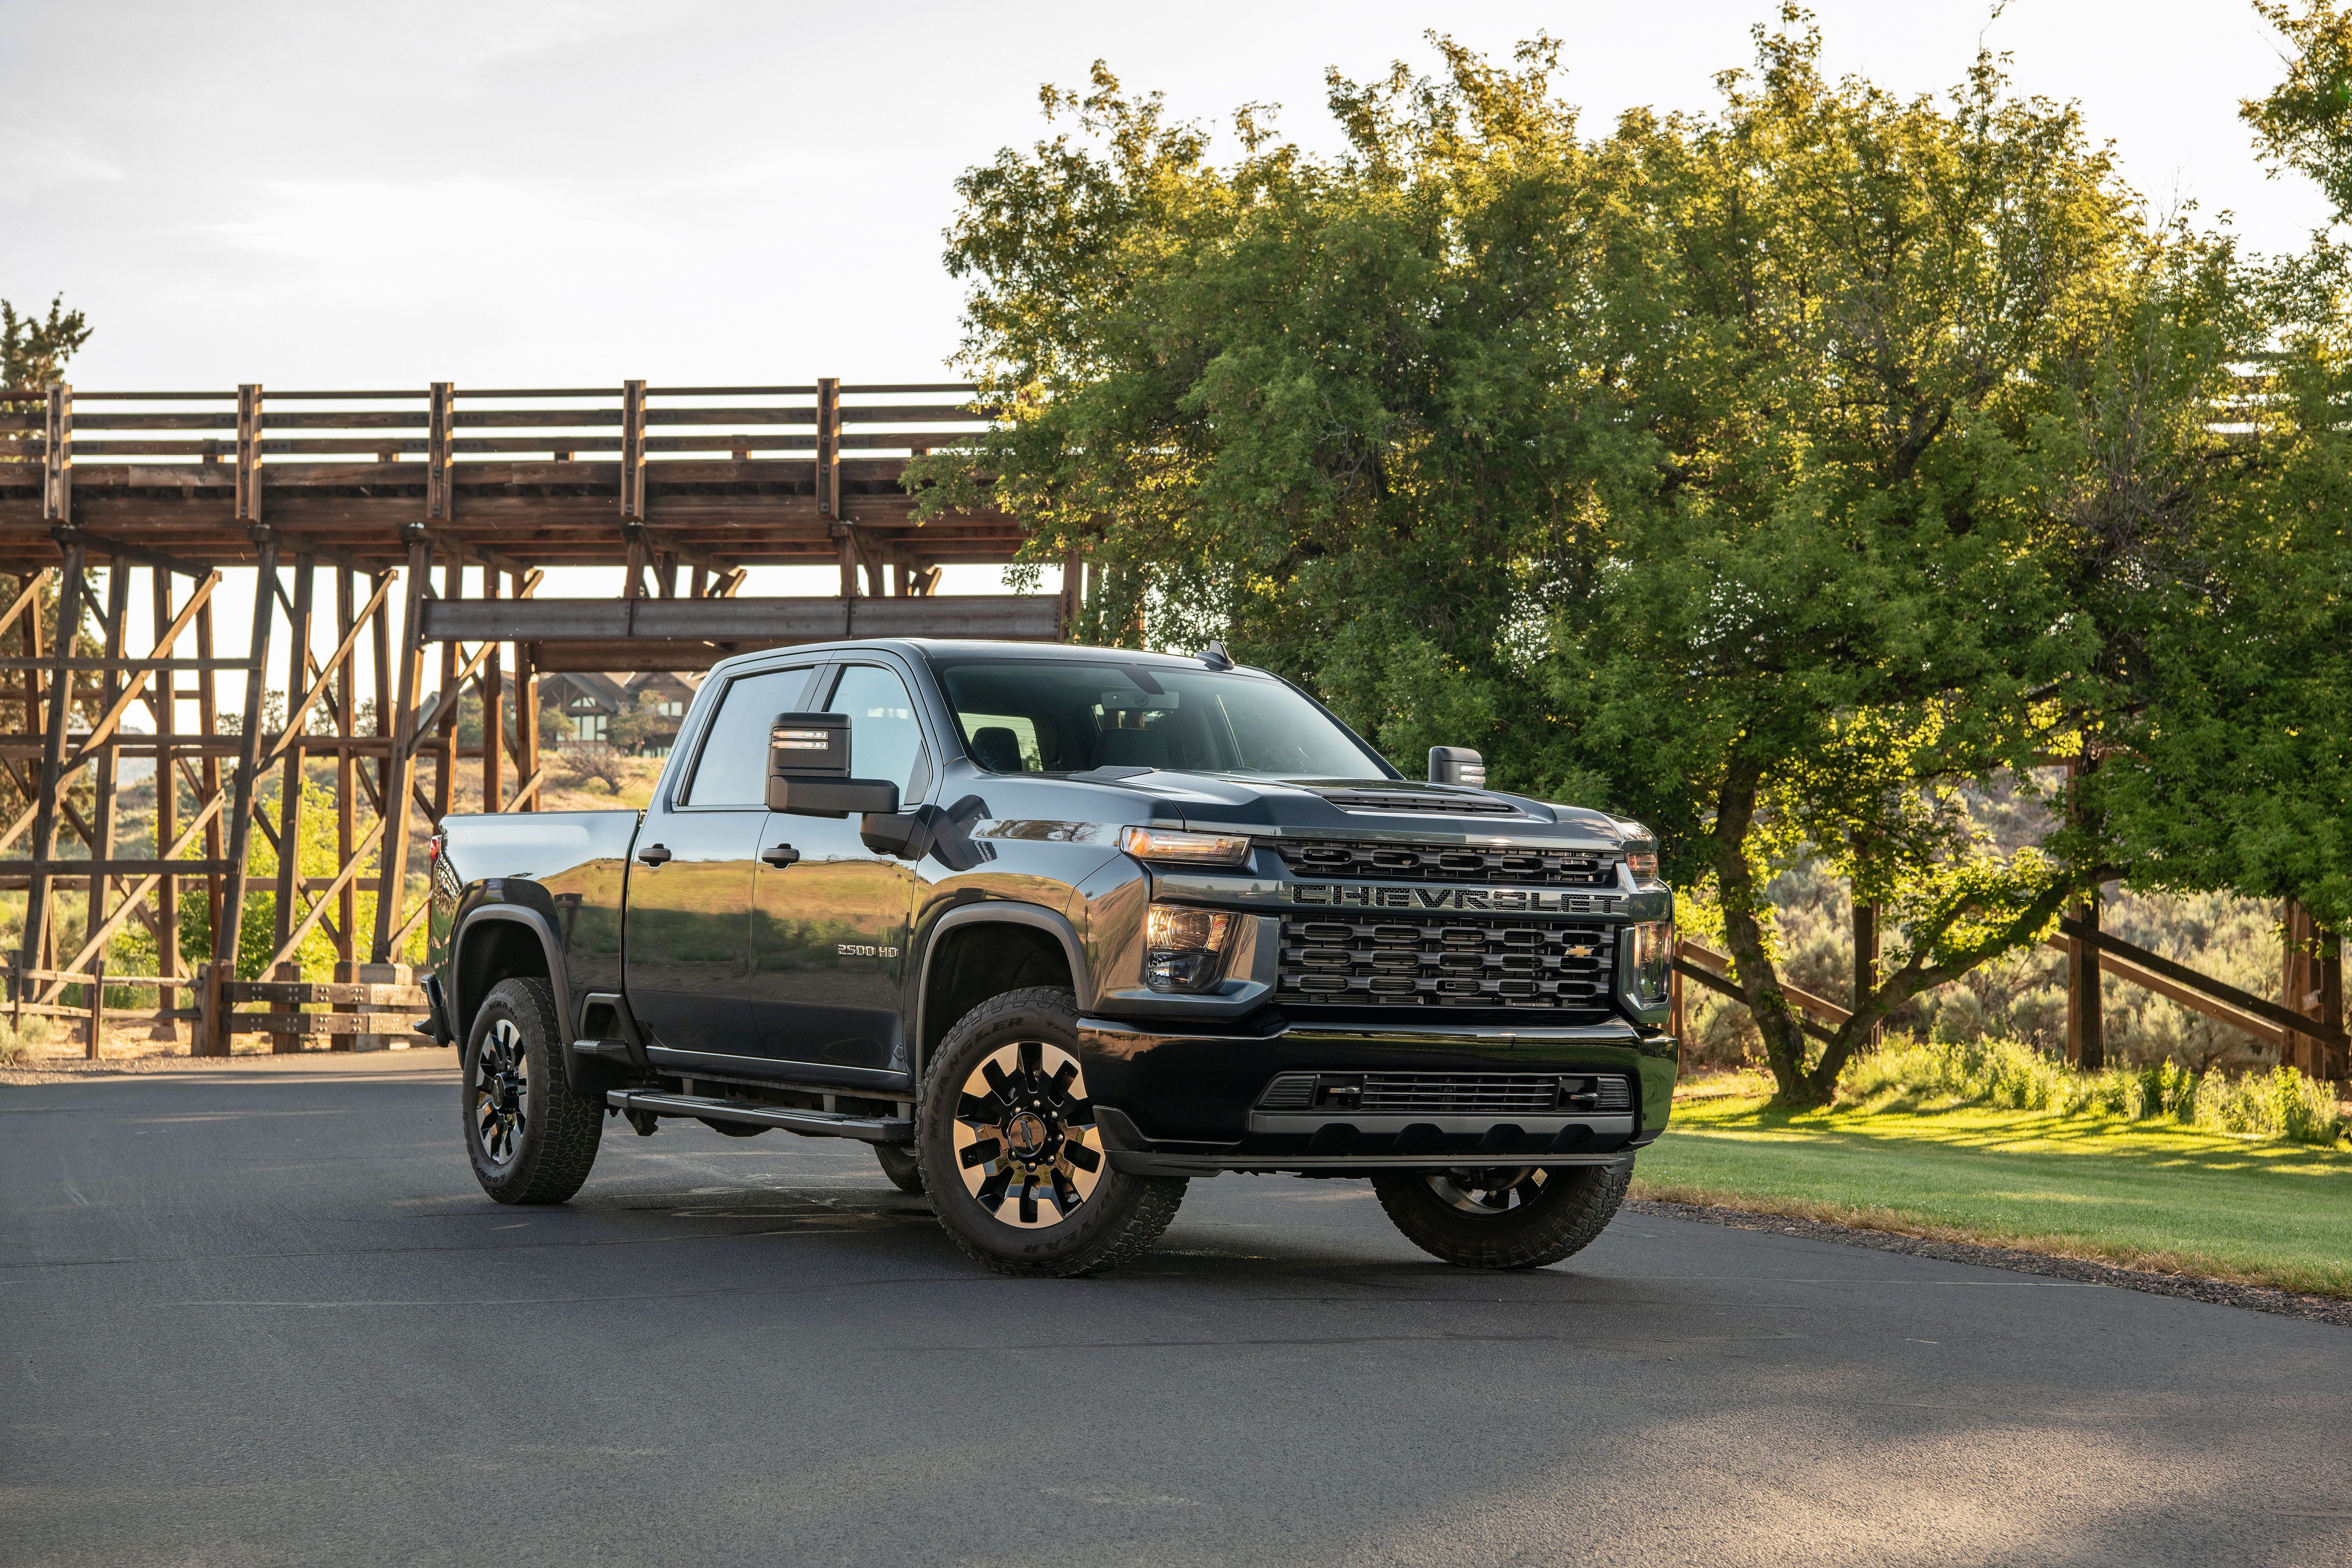 2020 Chevrolet Silverado Hd Review Pricing And Specs